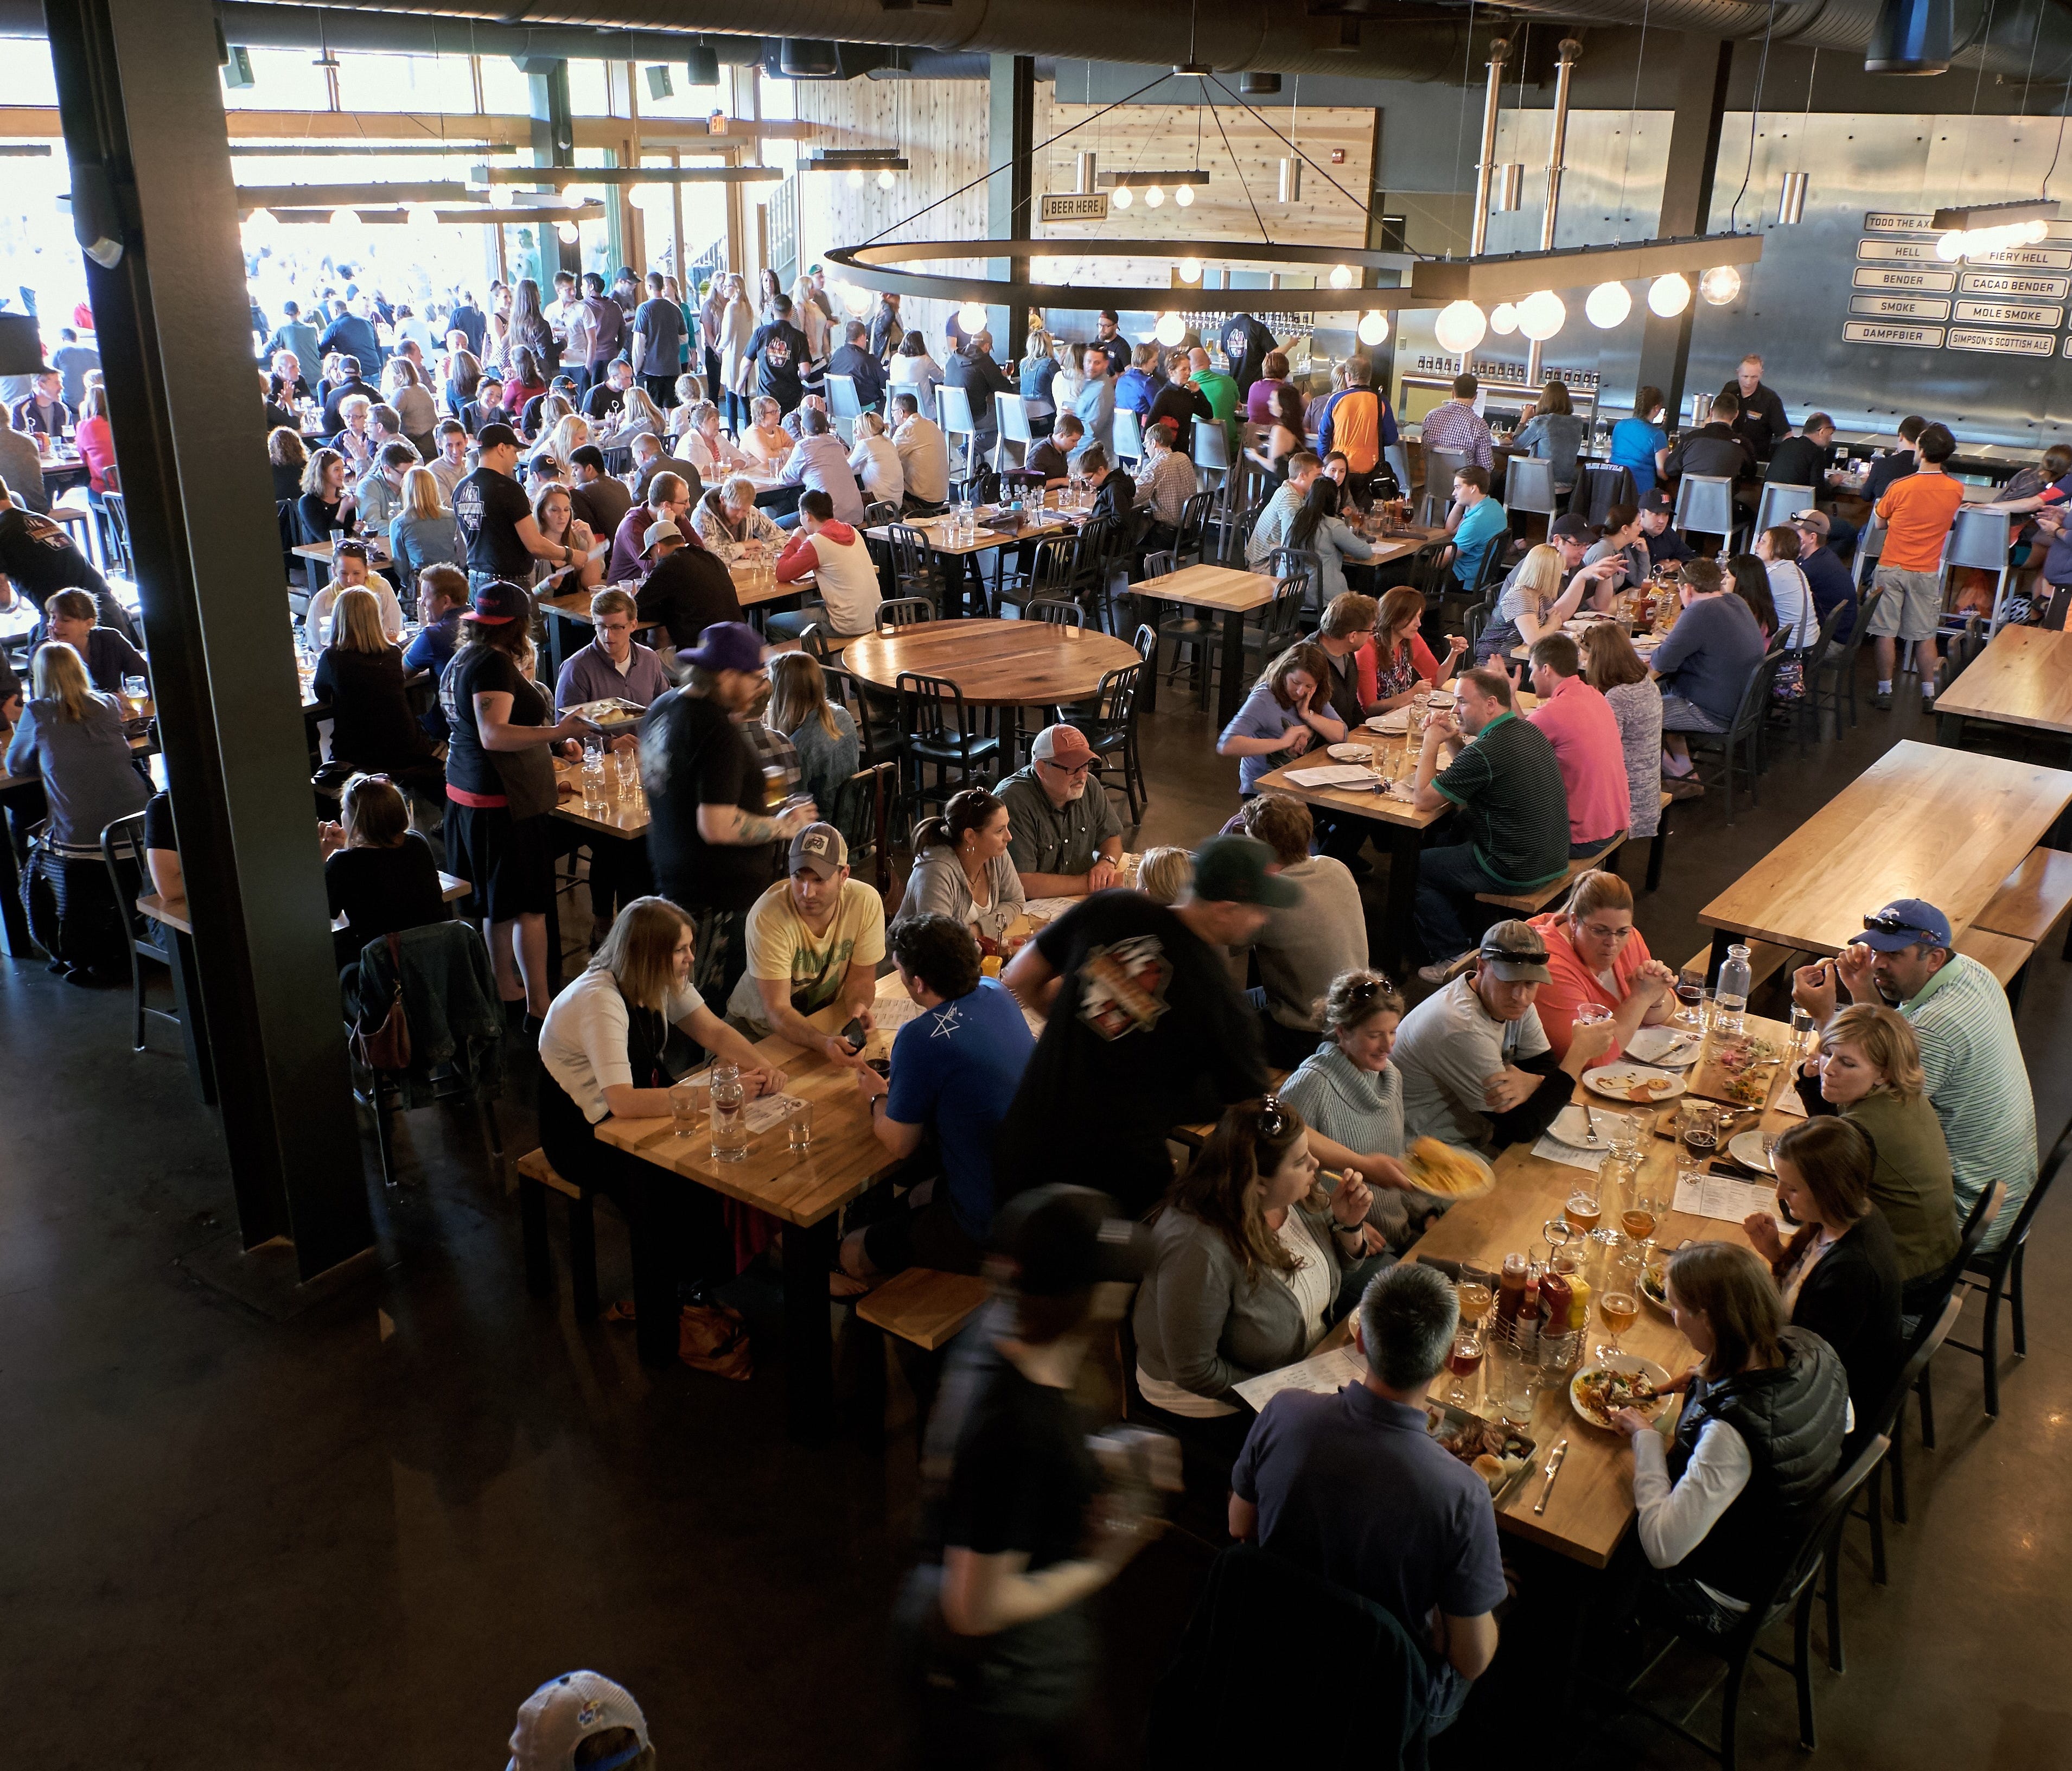 The beer hall is open daily (first come, first served) with a full menu and 25 beers on tap.